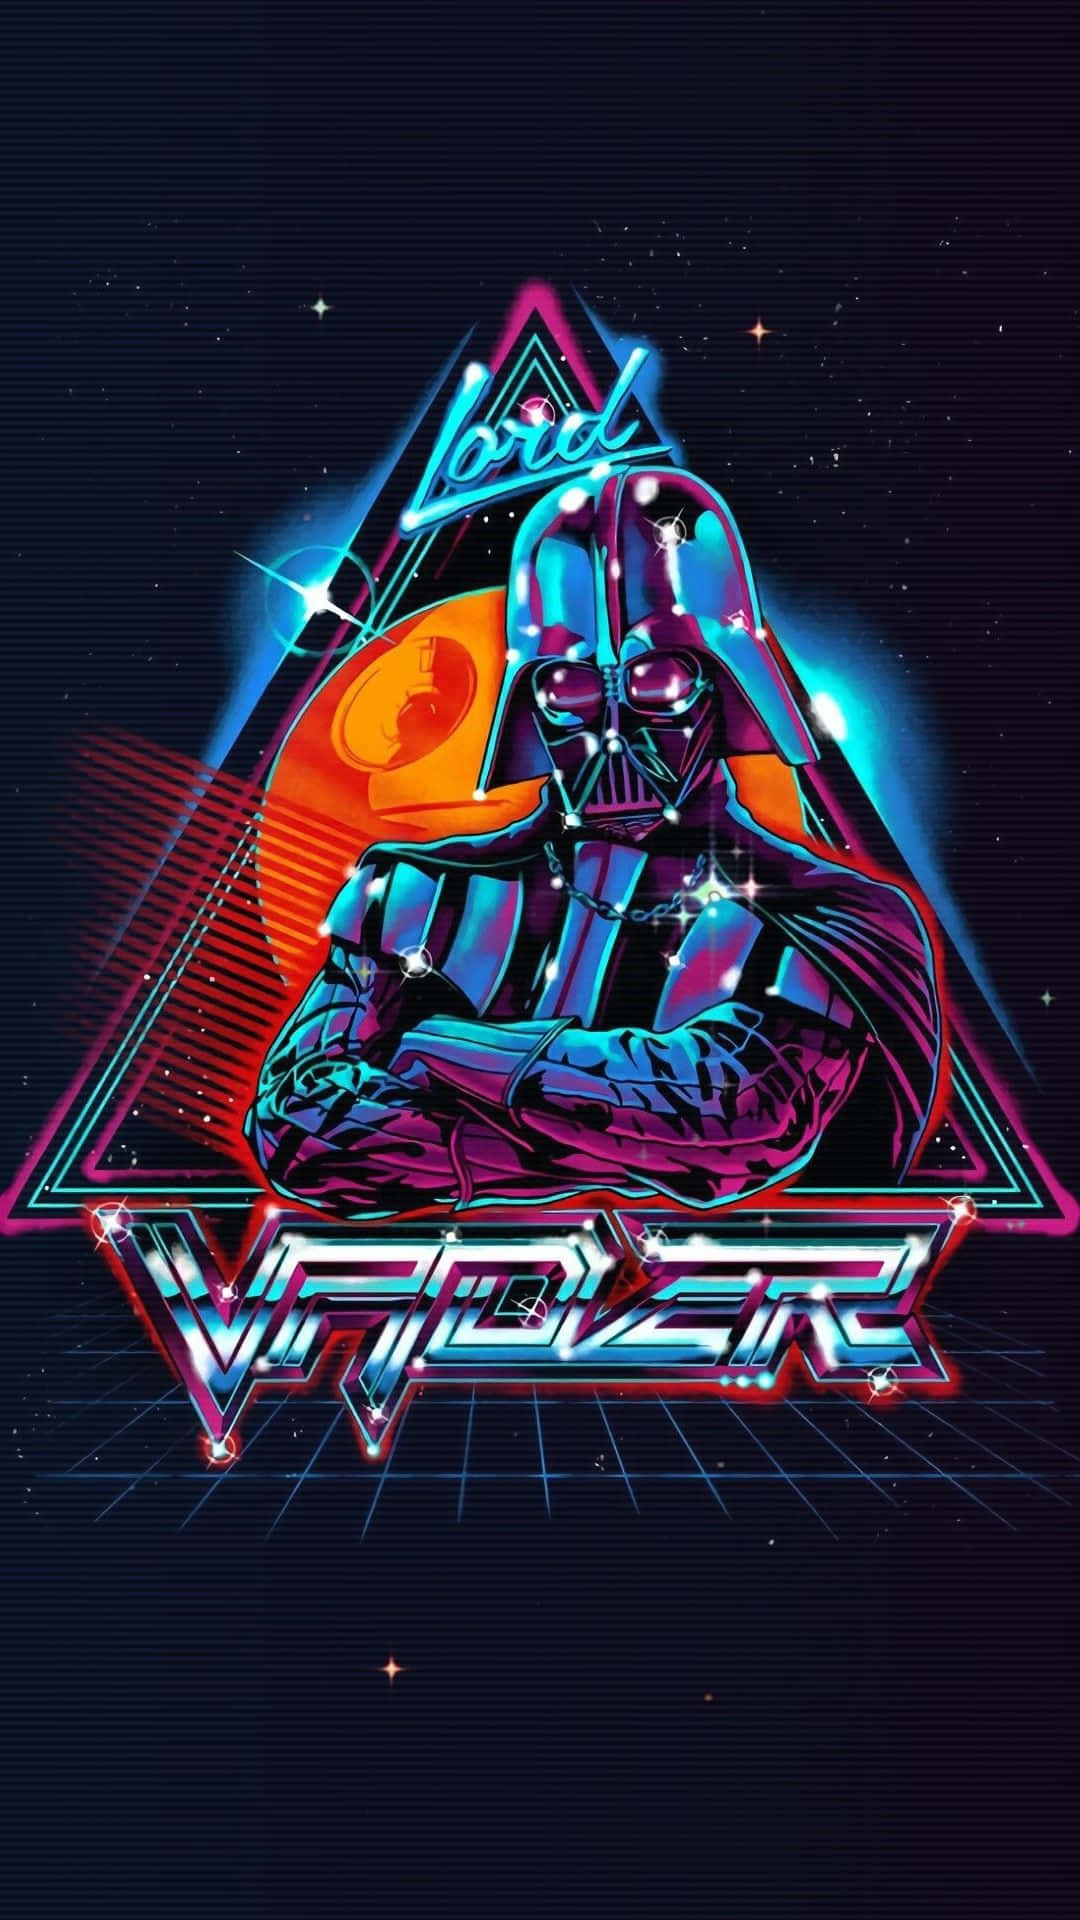 Show loyalty to the dark side with the Darth Vader iPhone. Wallpaper